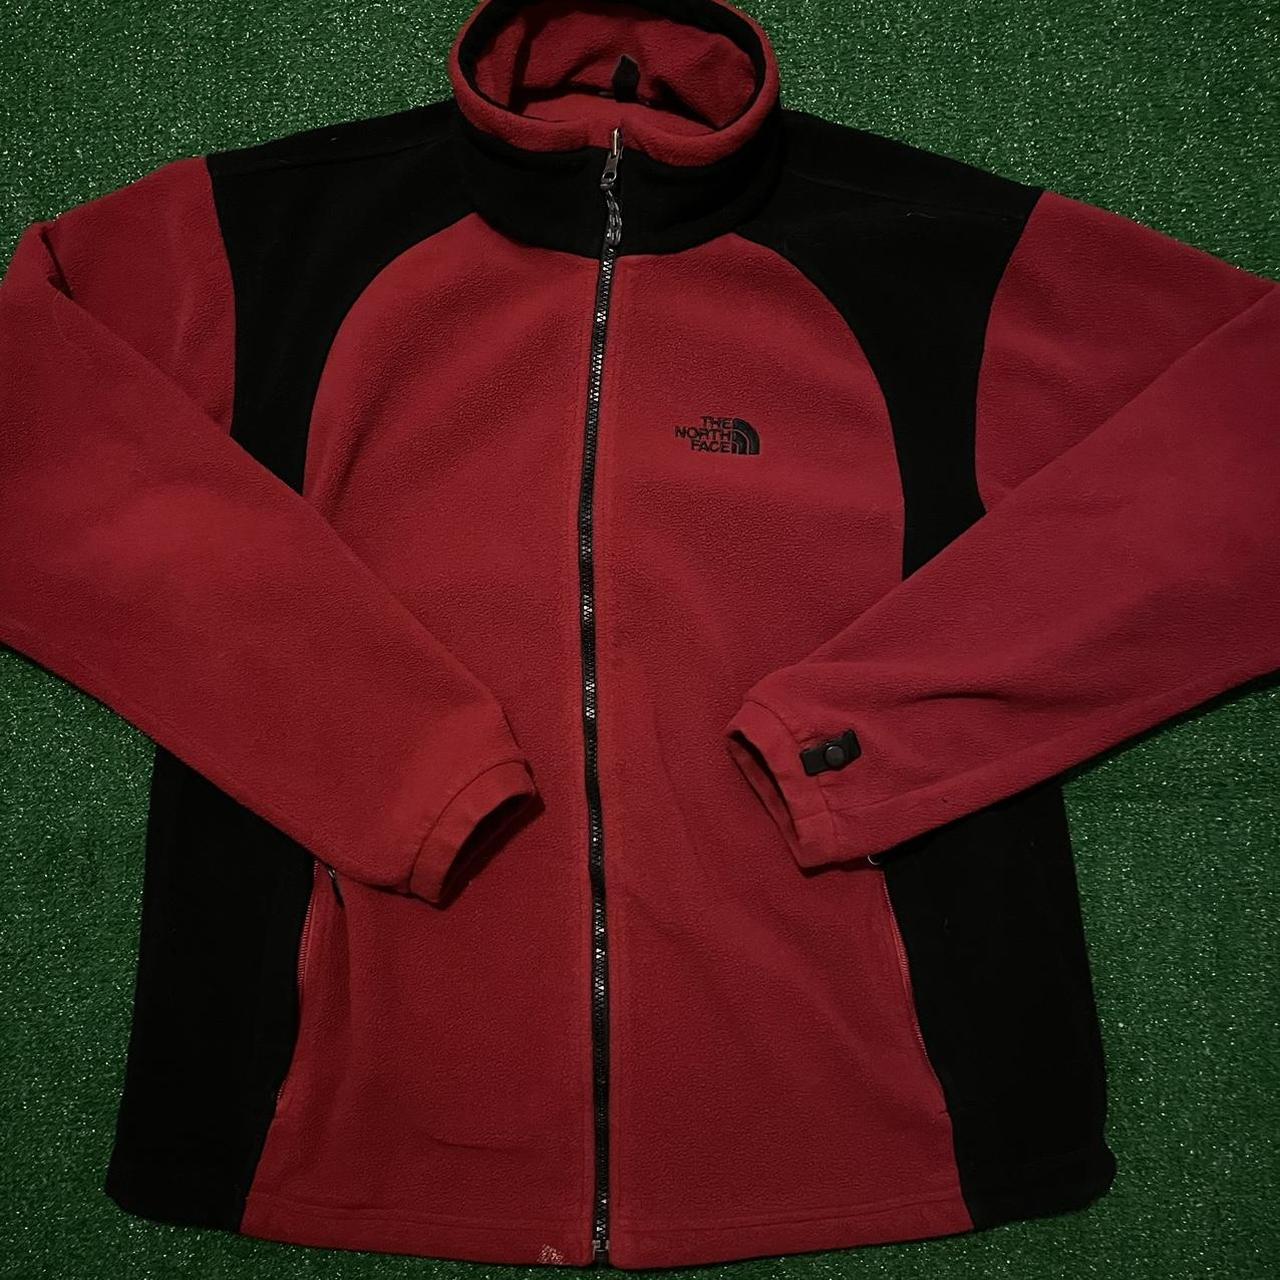 The North Face Men's Red and Black Jacket